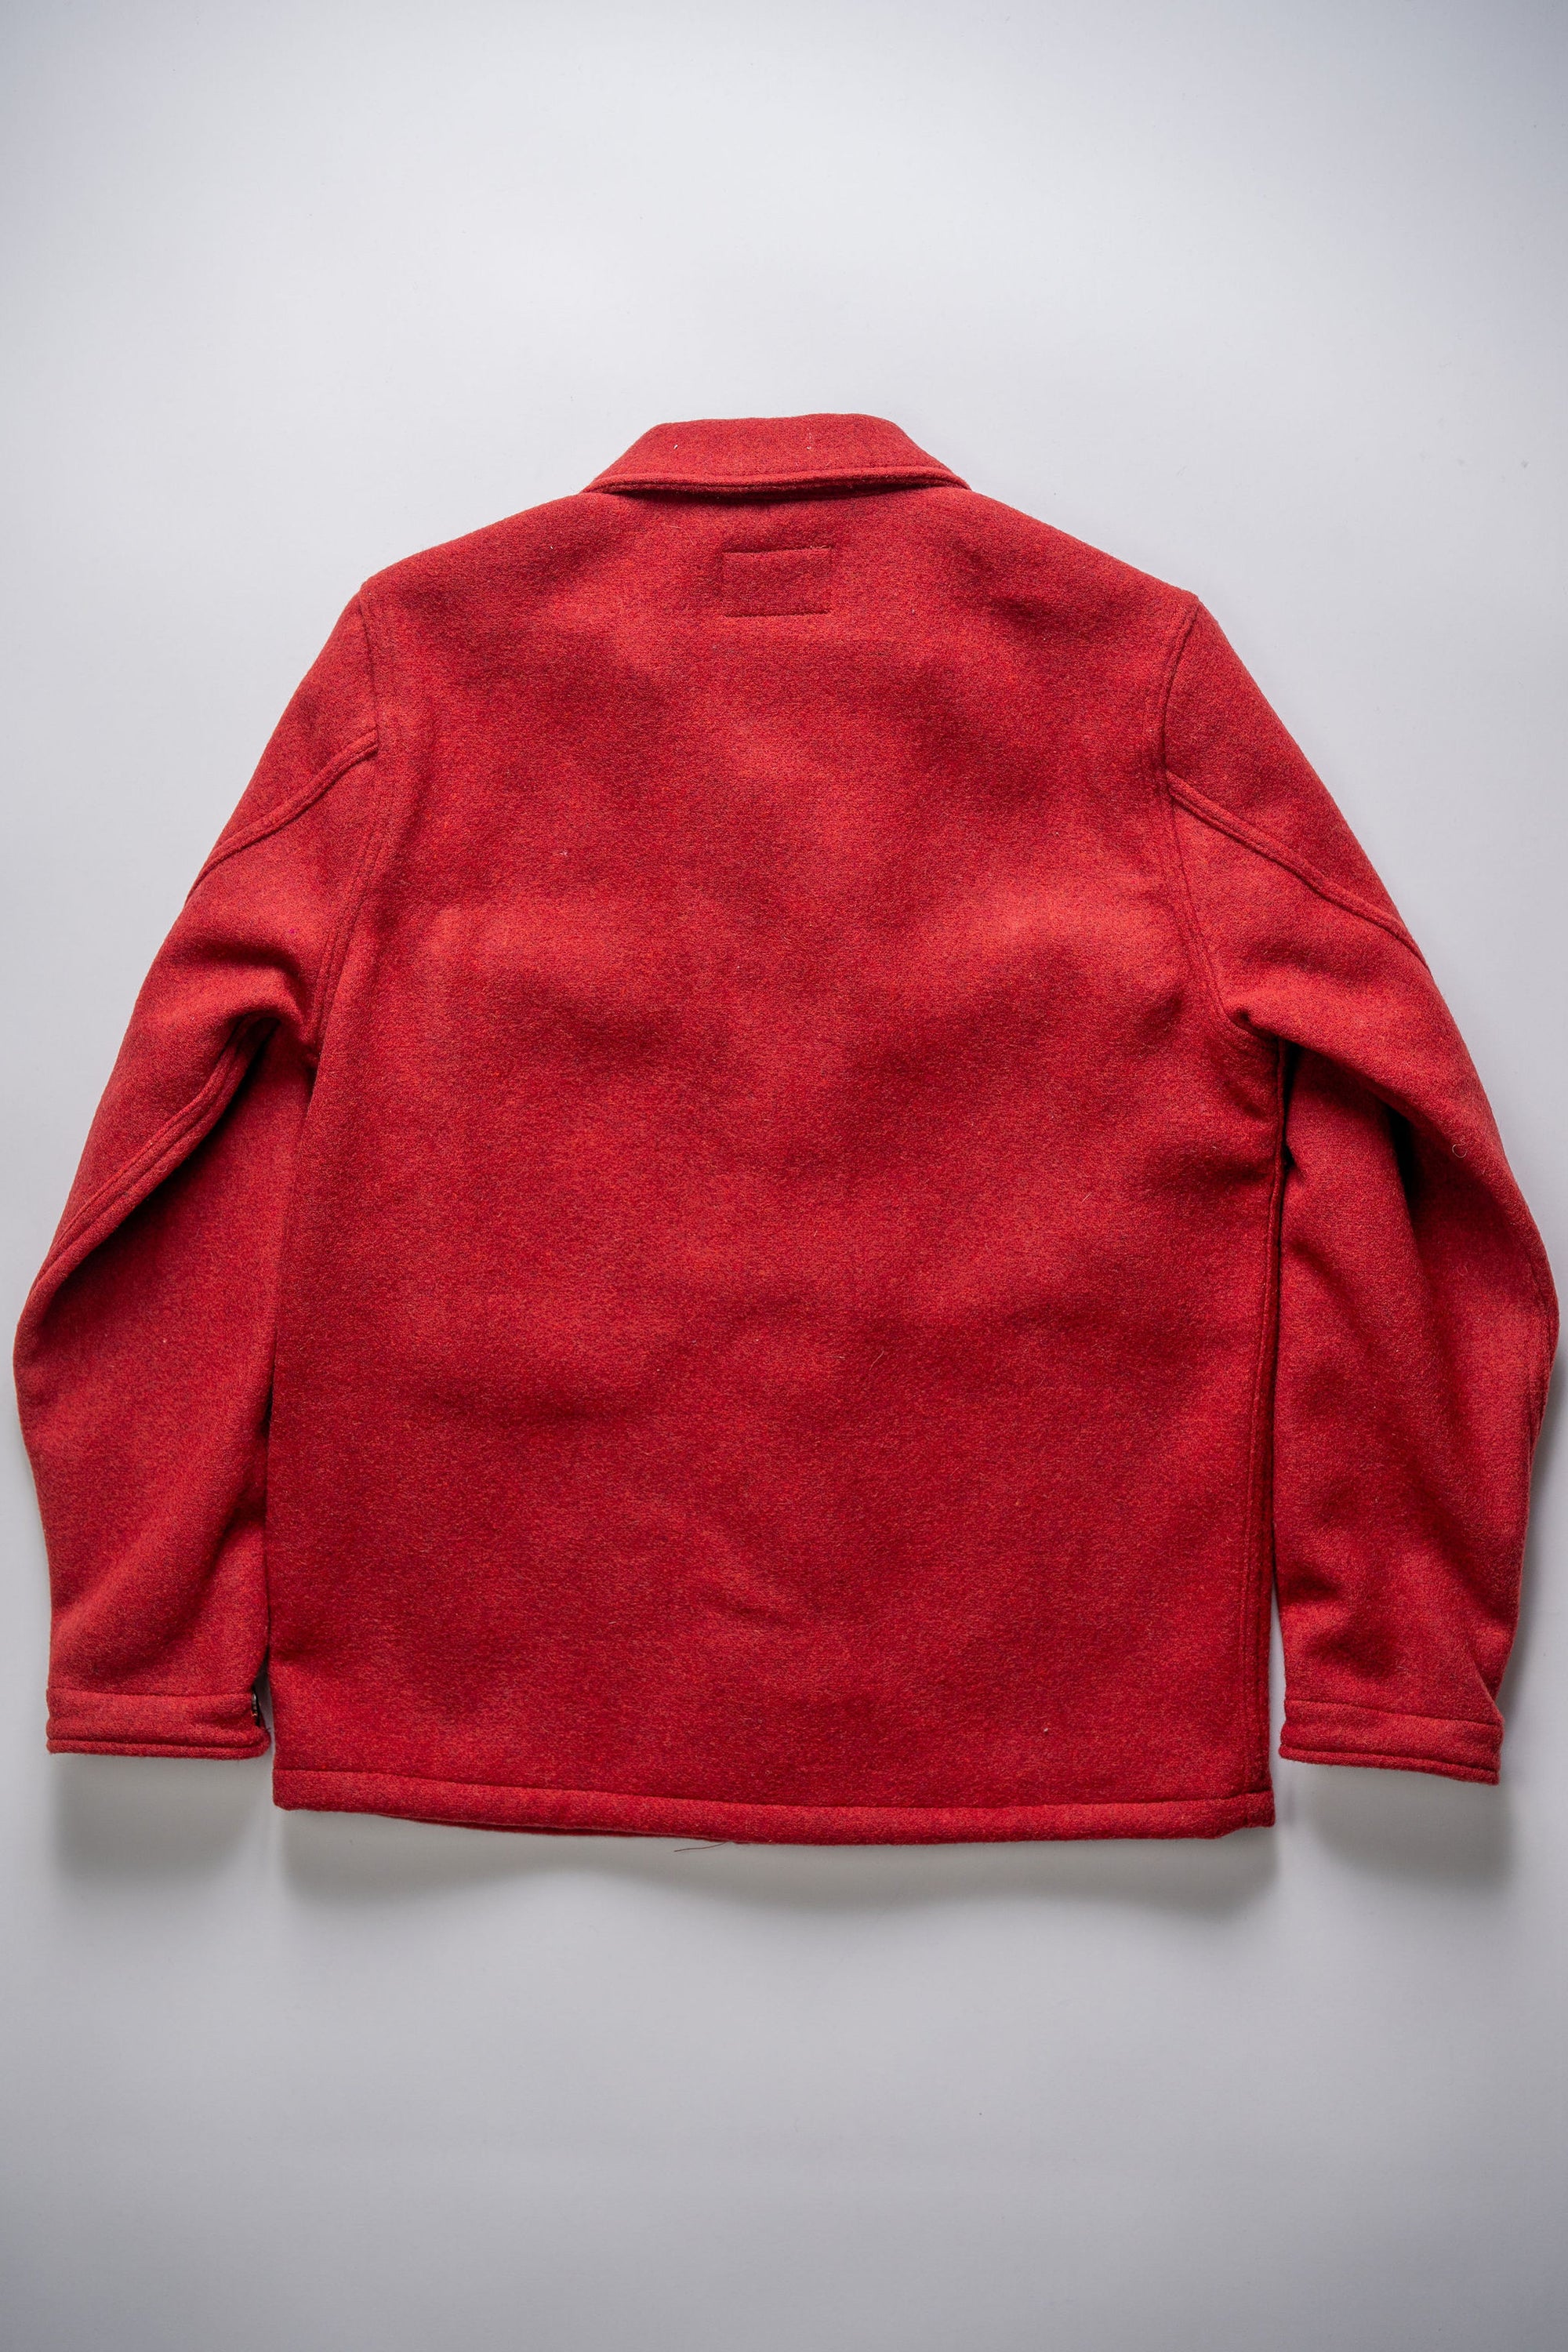 Freenote Cloth Midway Wool - Red